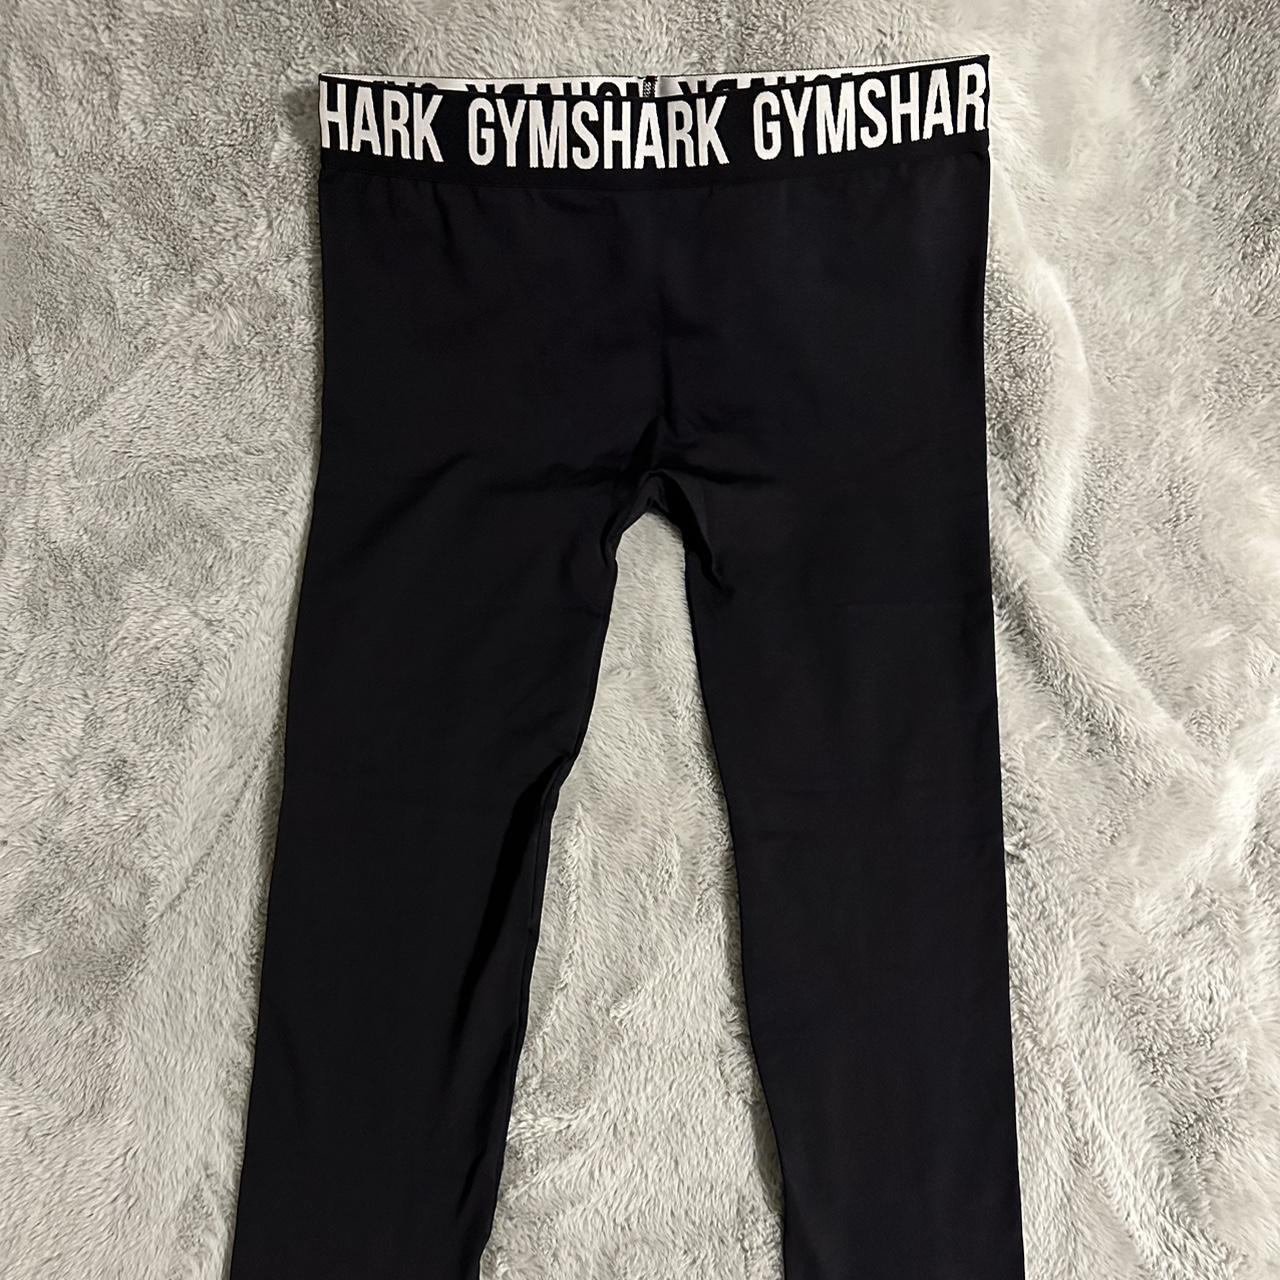 TJSKLCV Womens Leggings Size 14 Women's High Waisted Sports Leggings Soft  Full Length Fit High Waisted Workout Gym Leggings Gifts for Pregnant Women  Sales Clearance Black : Amazon.co.uk: Fashion